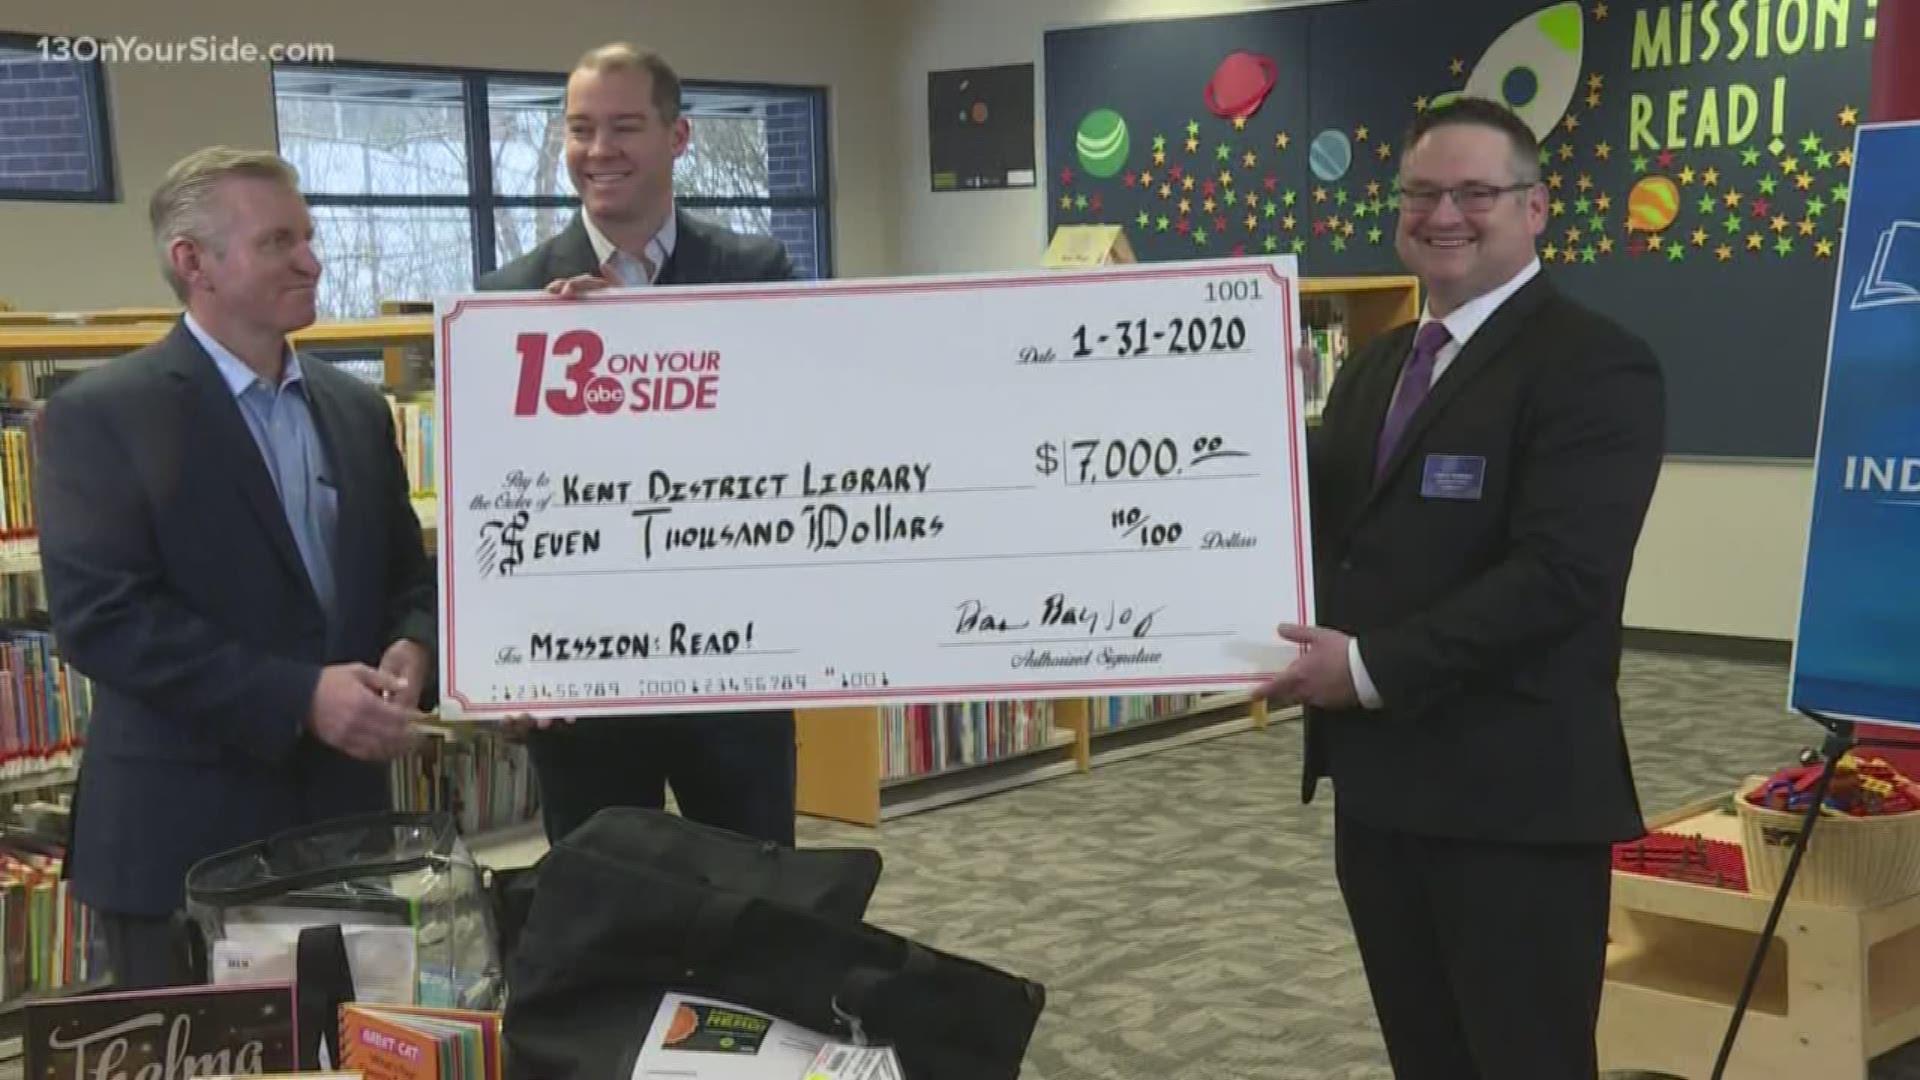 The $7,000 TEGNA Foundation grant will go to KDL's Mission: READ! project.